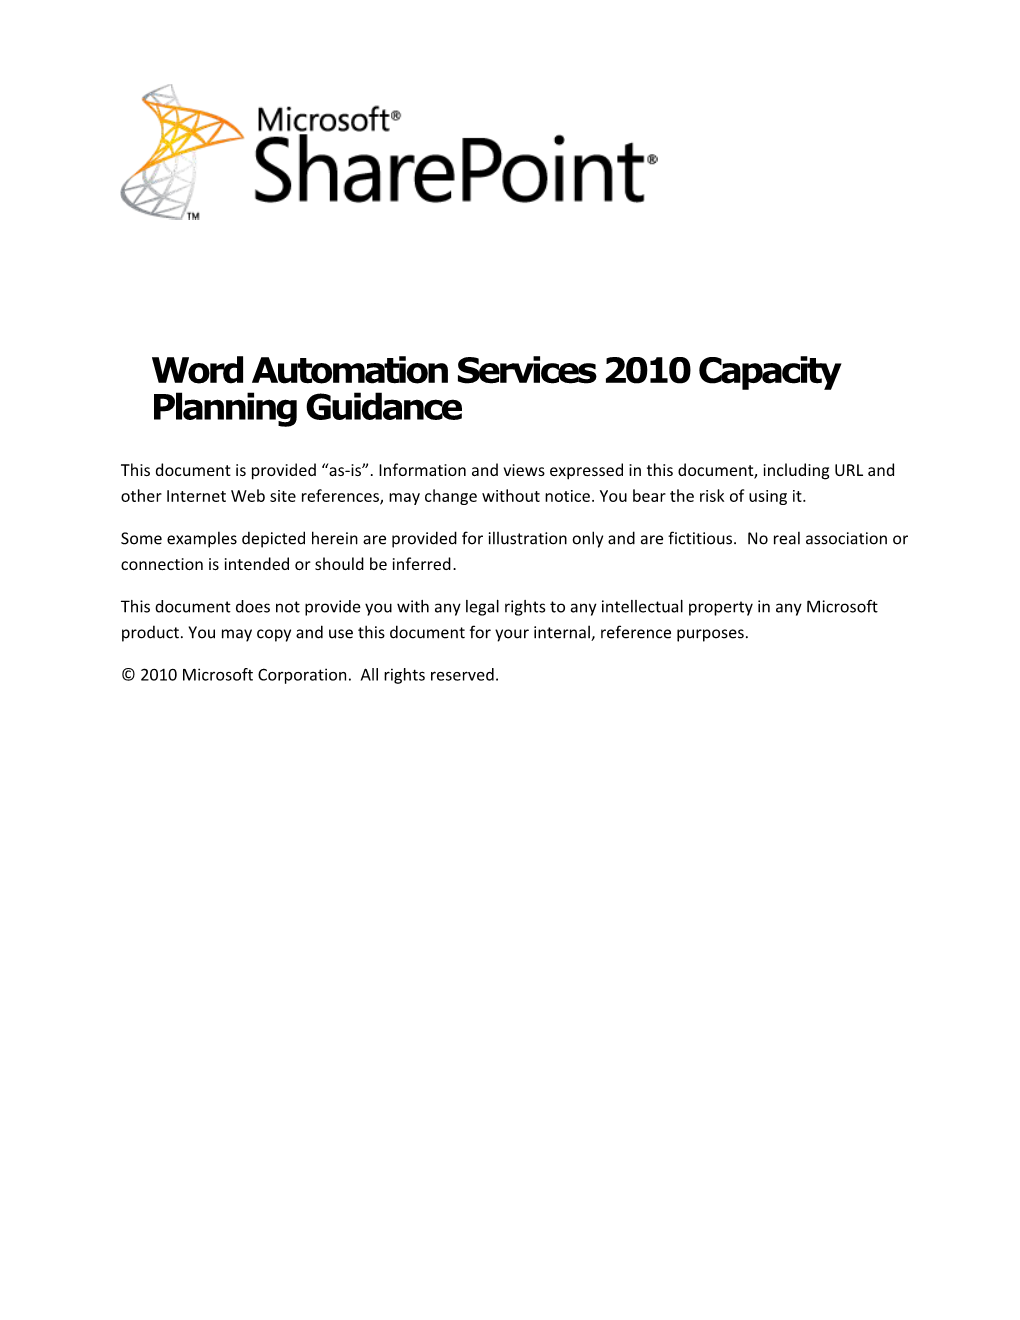 Word Automation Services 2010 Capacity Planning Guidance